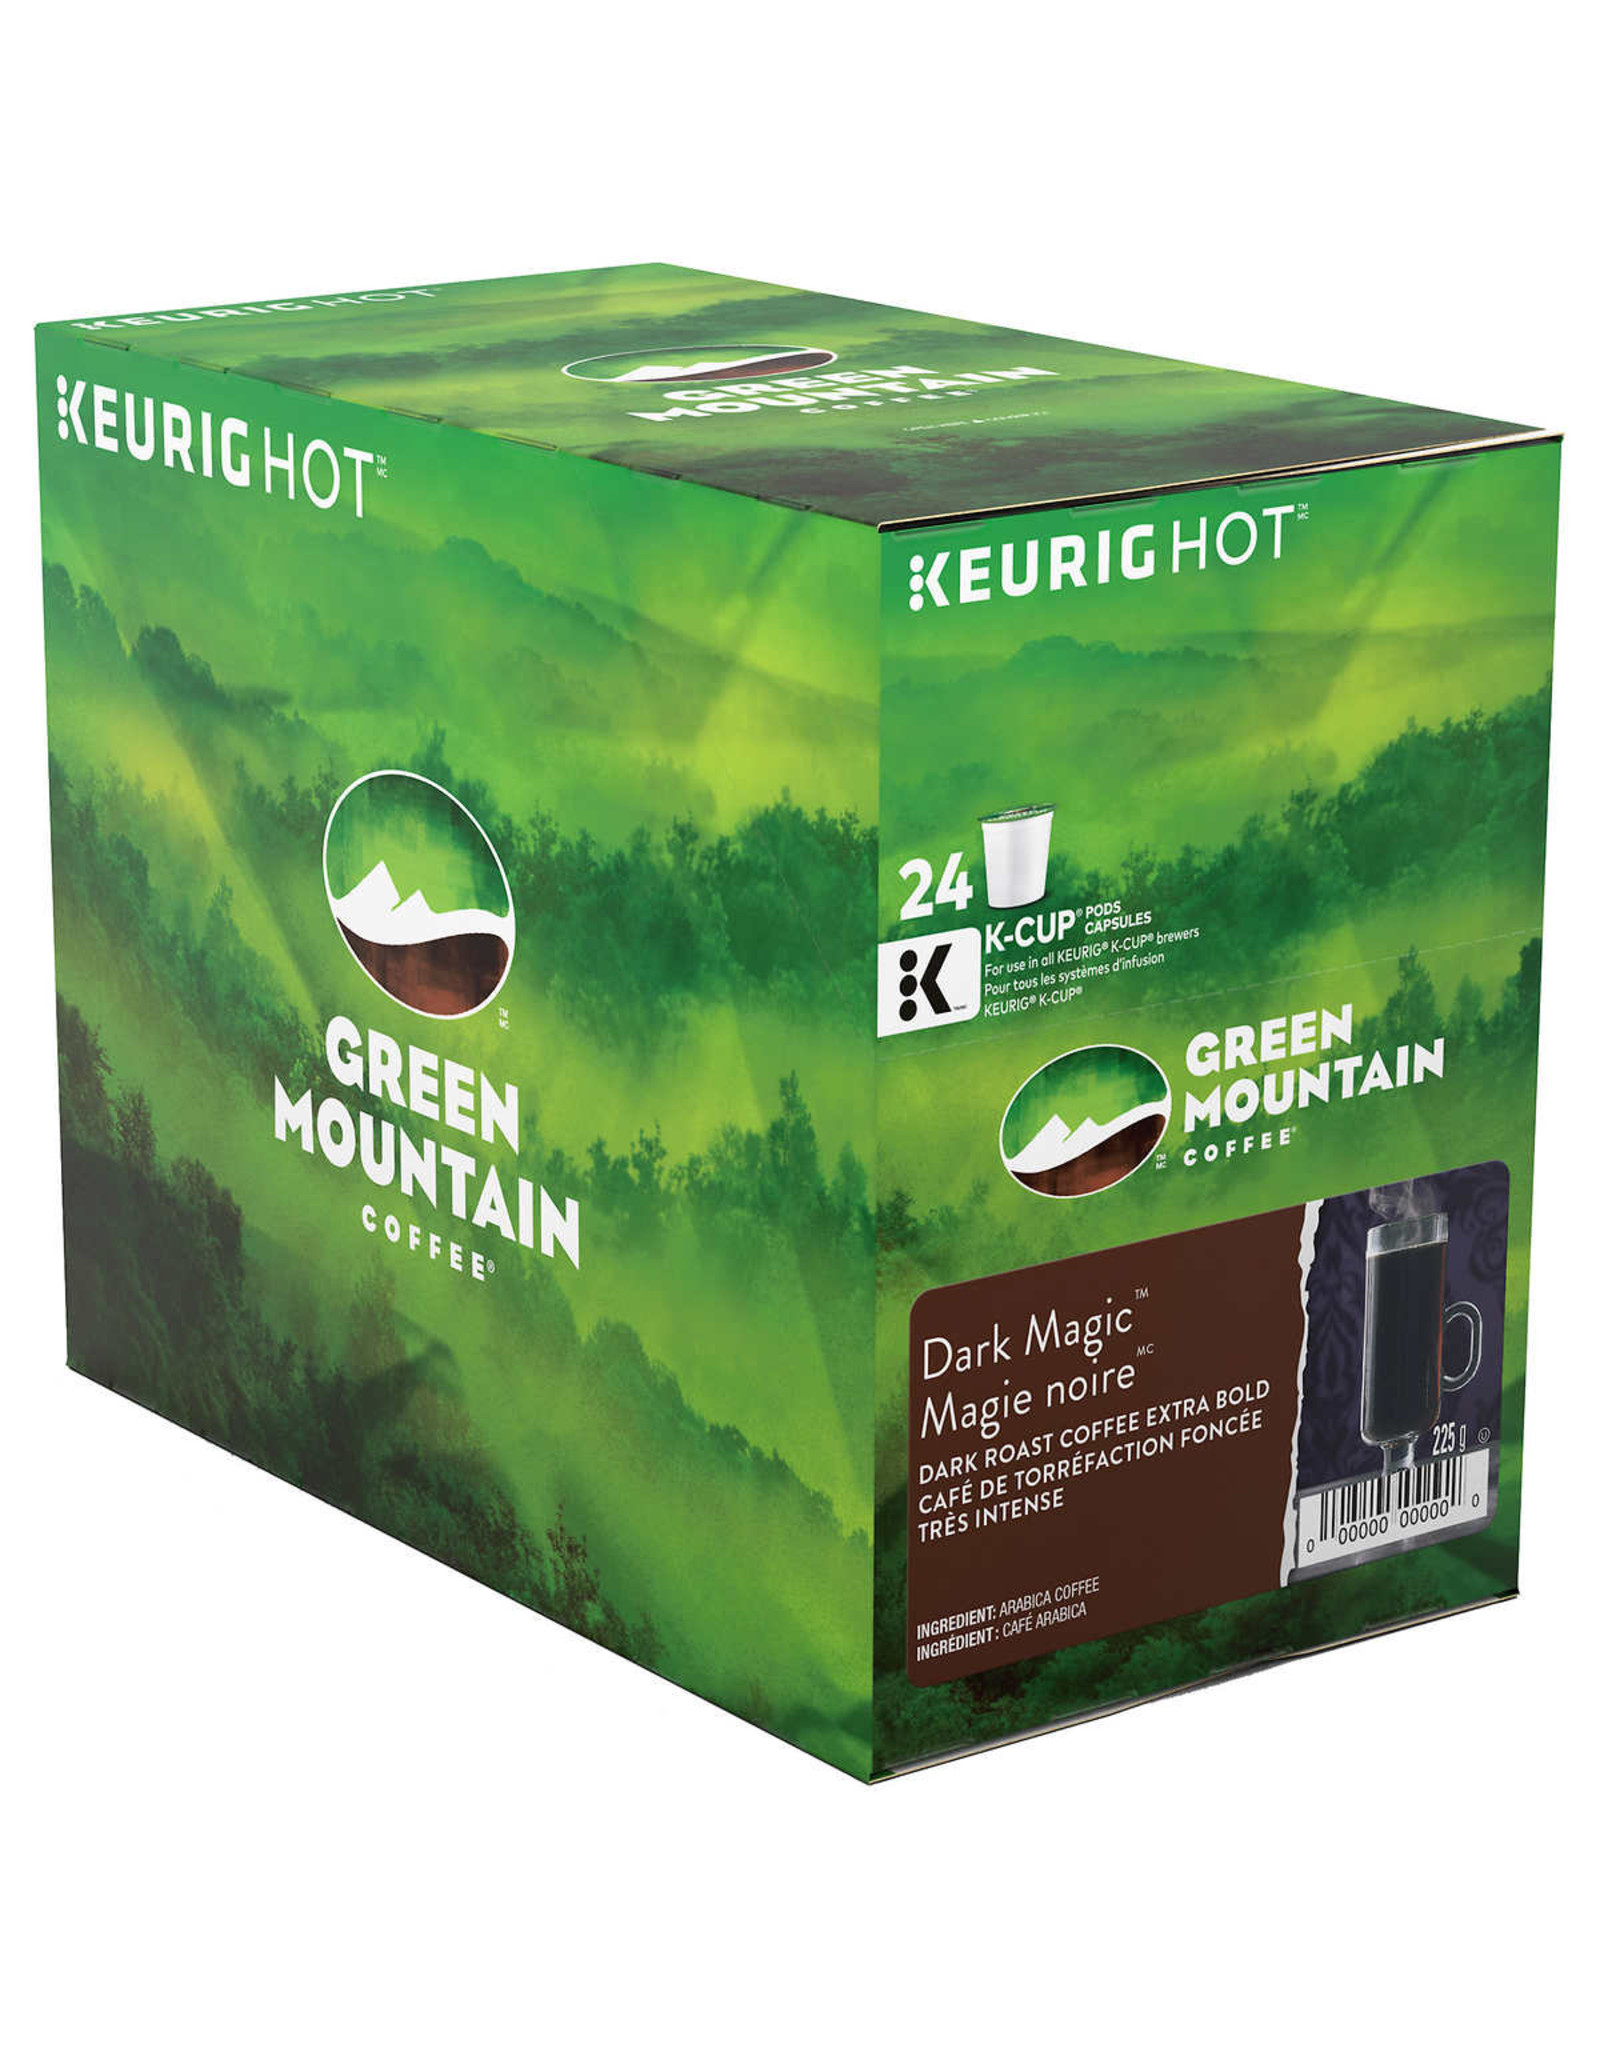 Green Mountain Green Mountain Magie noire - capsules KCUP